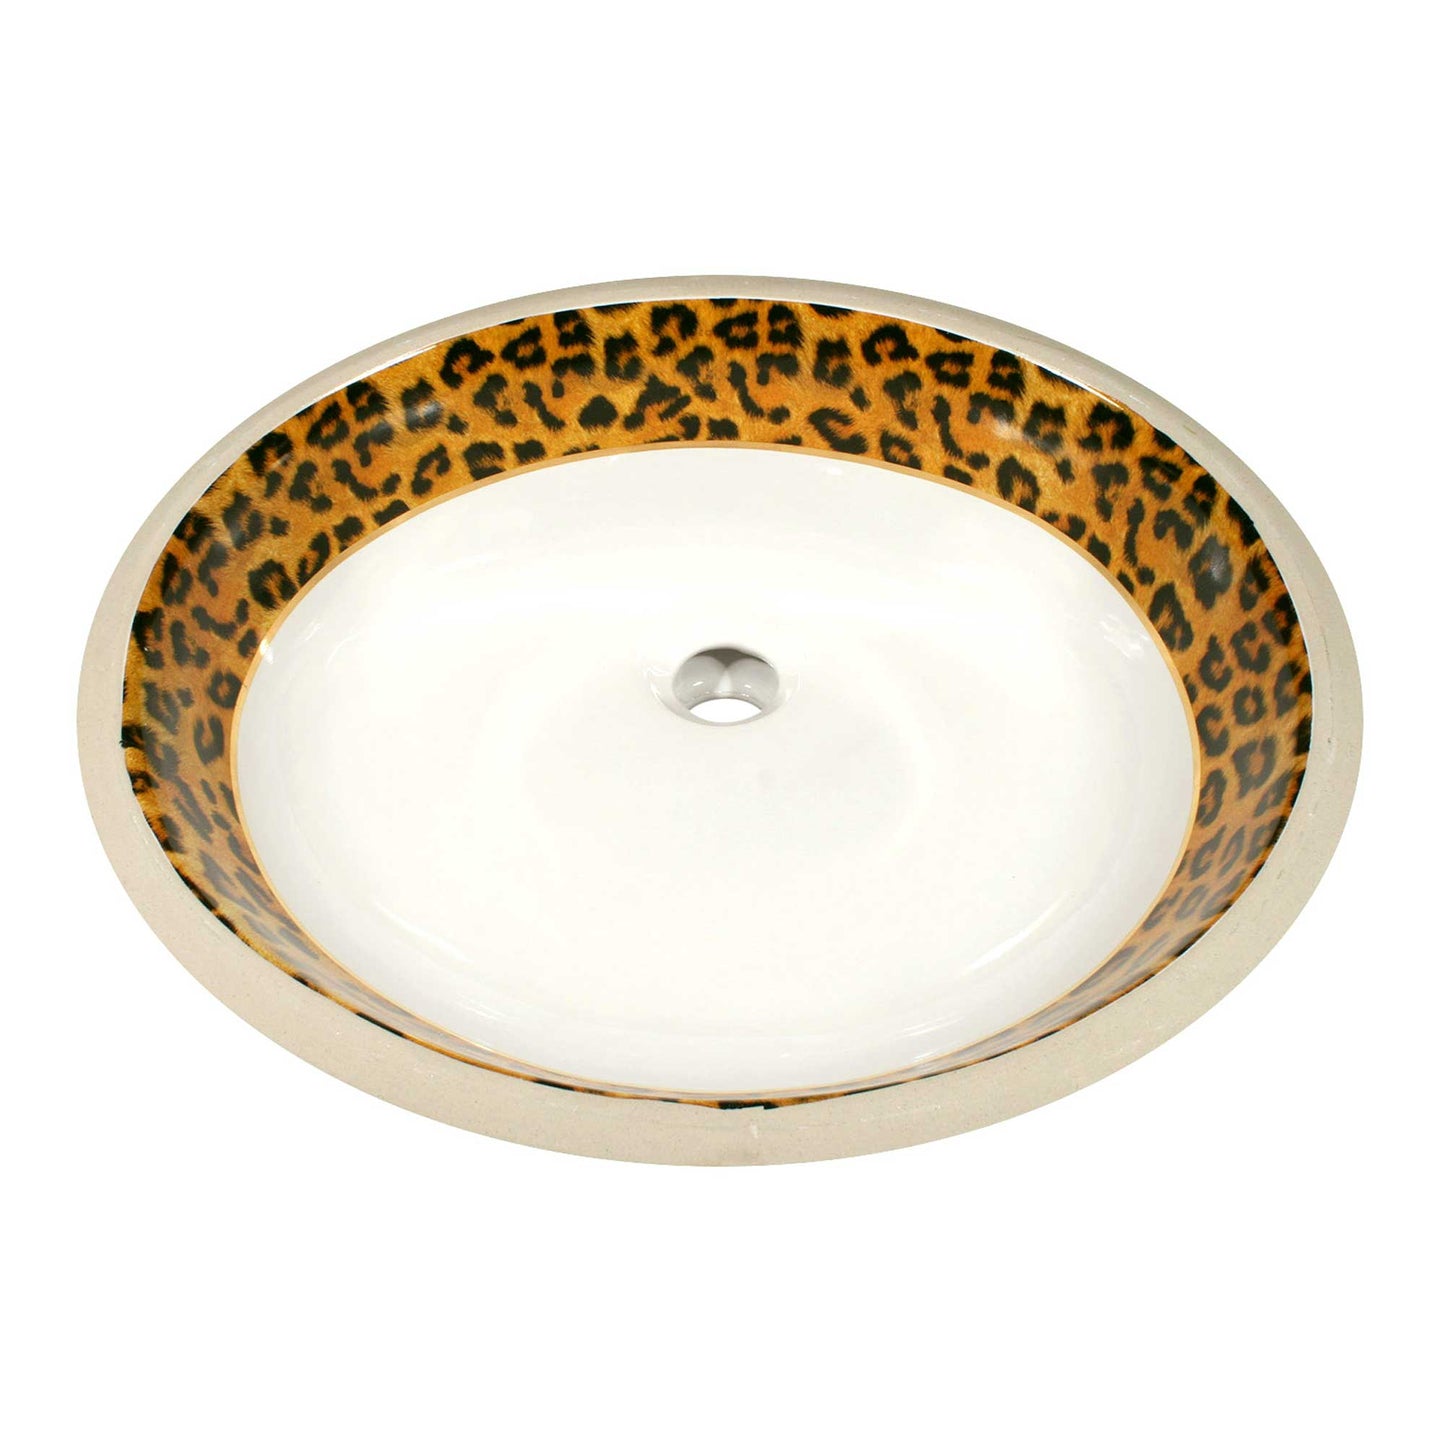 Leopard print and gold bands painted undercount bathroom sink.